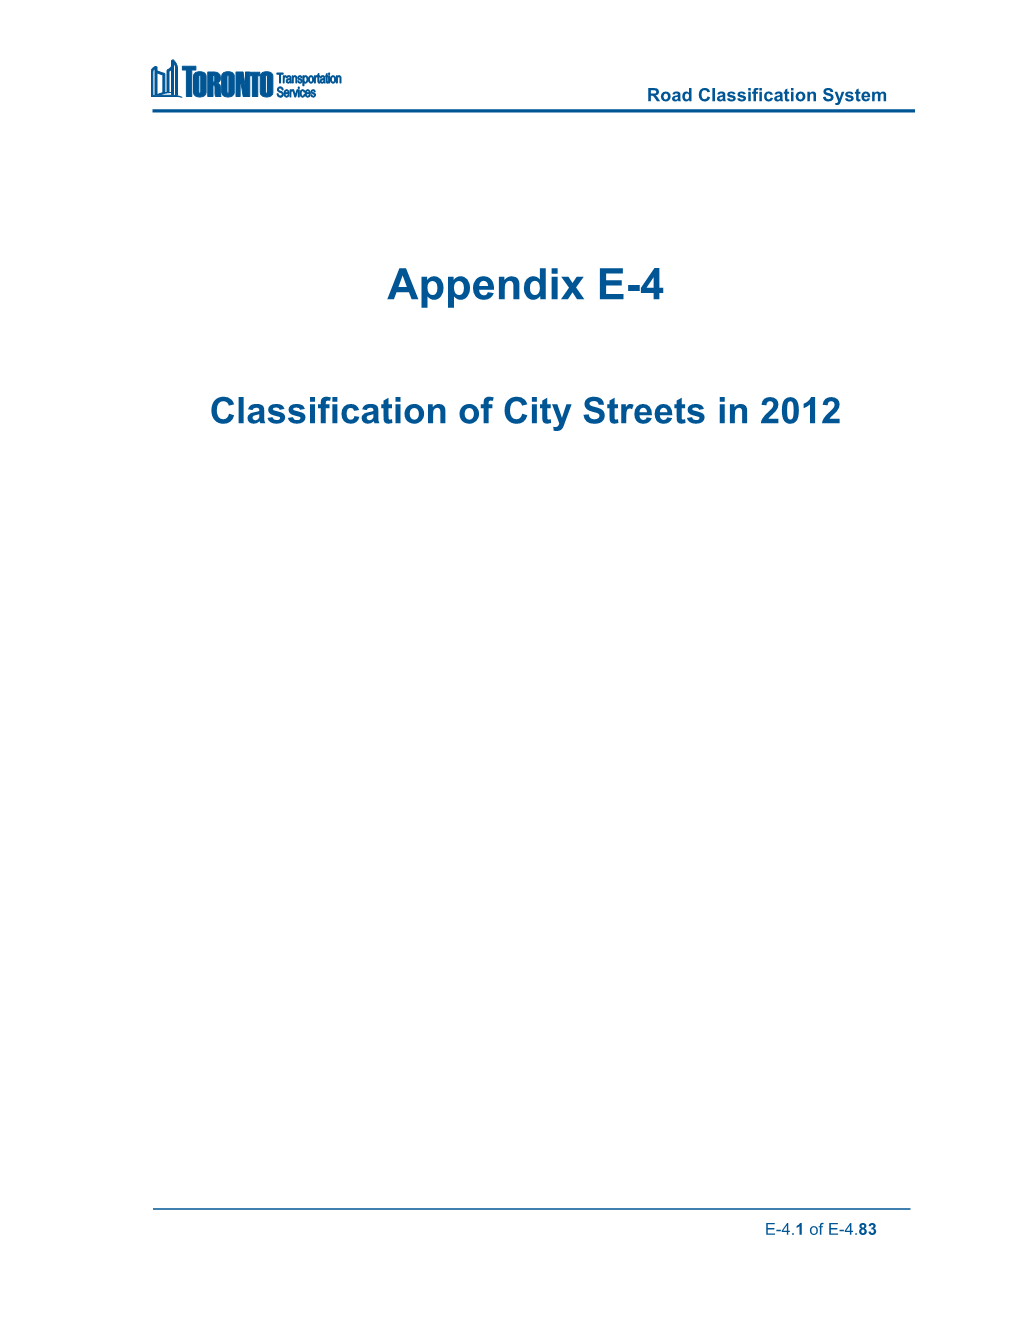 Classification of City Streets 2012